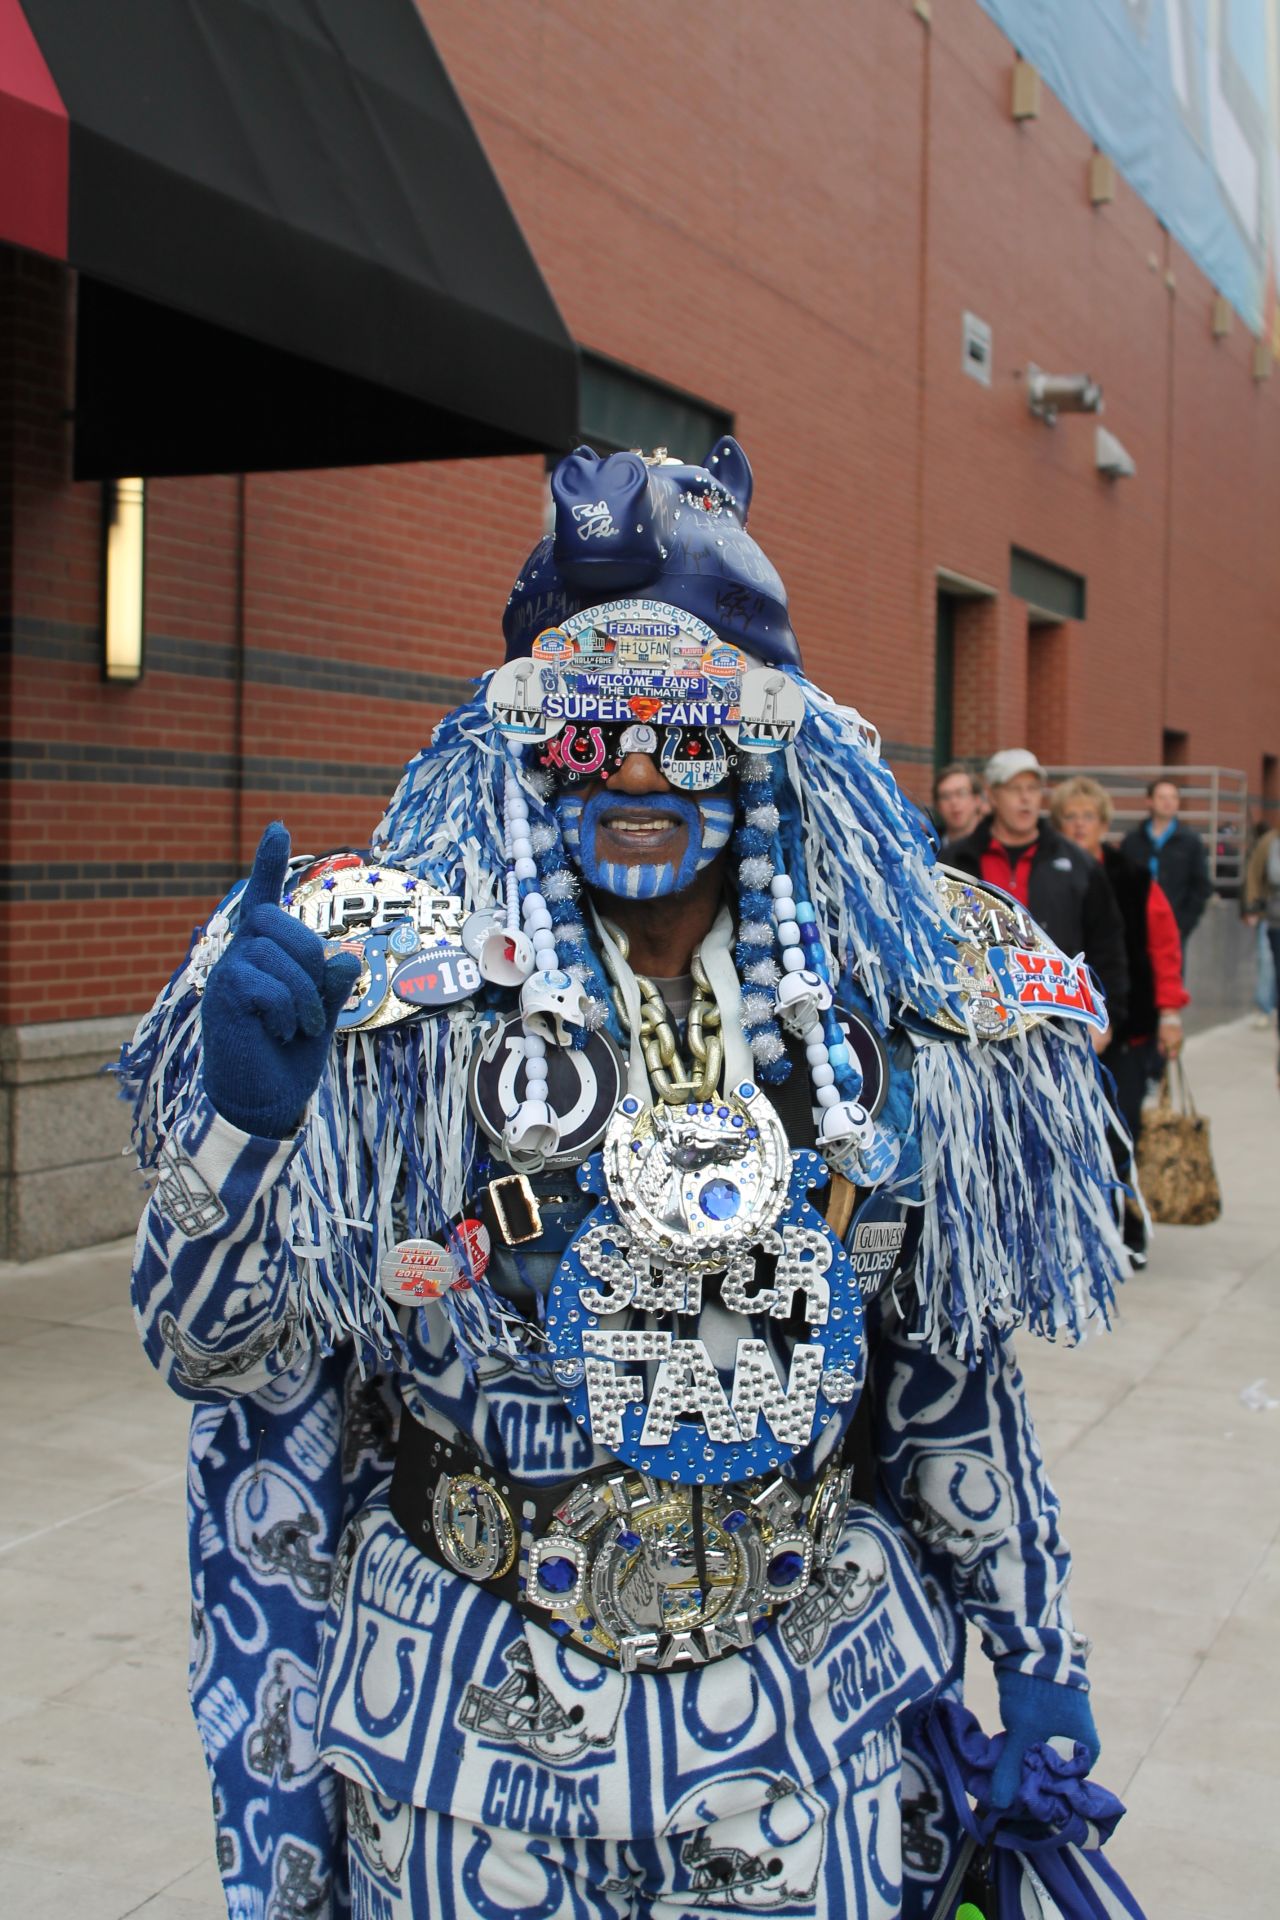 An avid fan displays the memorabilia from past and present Super Bowl contests ahead of the game in Indianapolis.